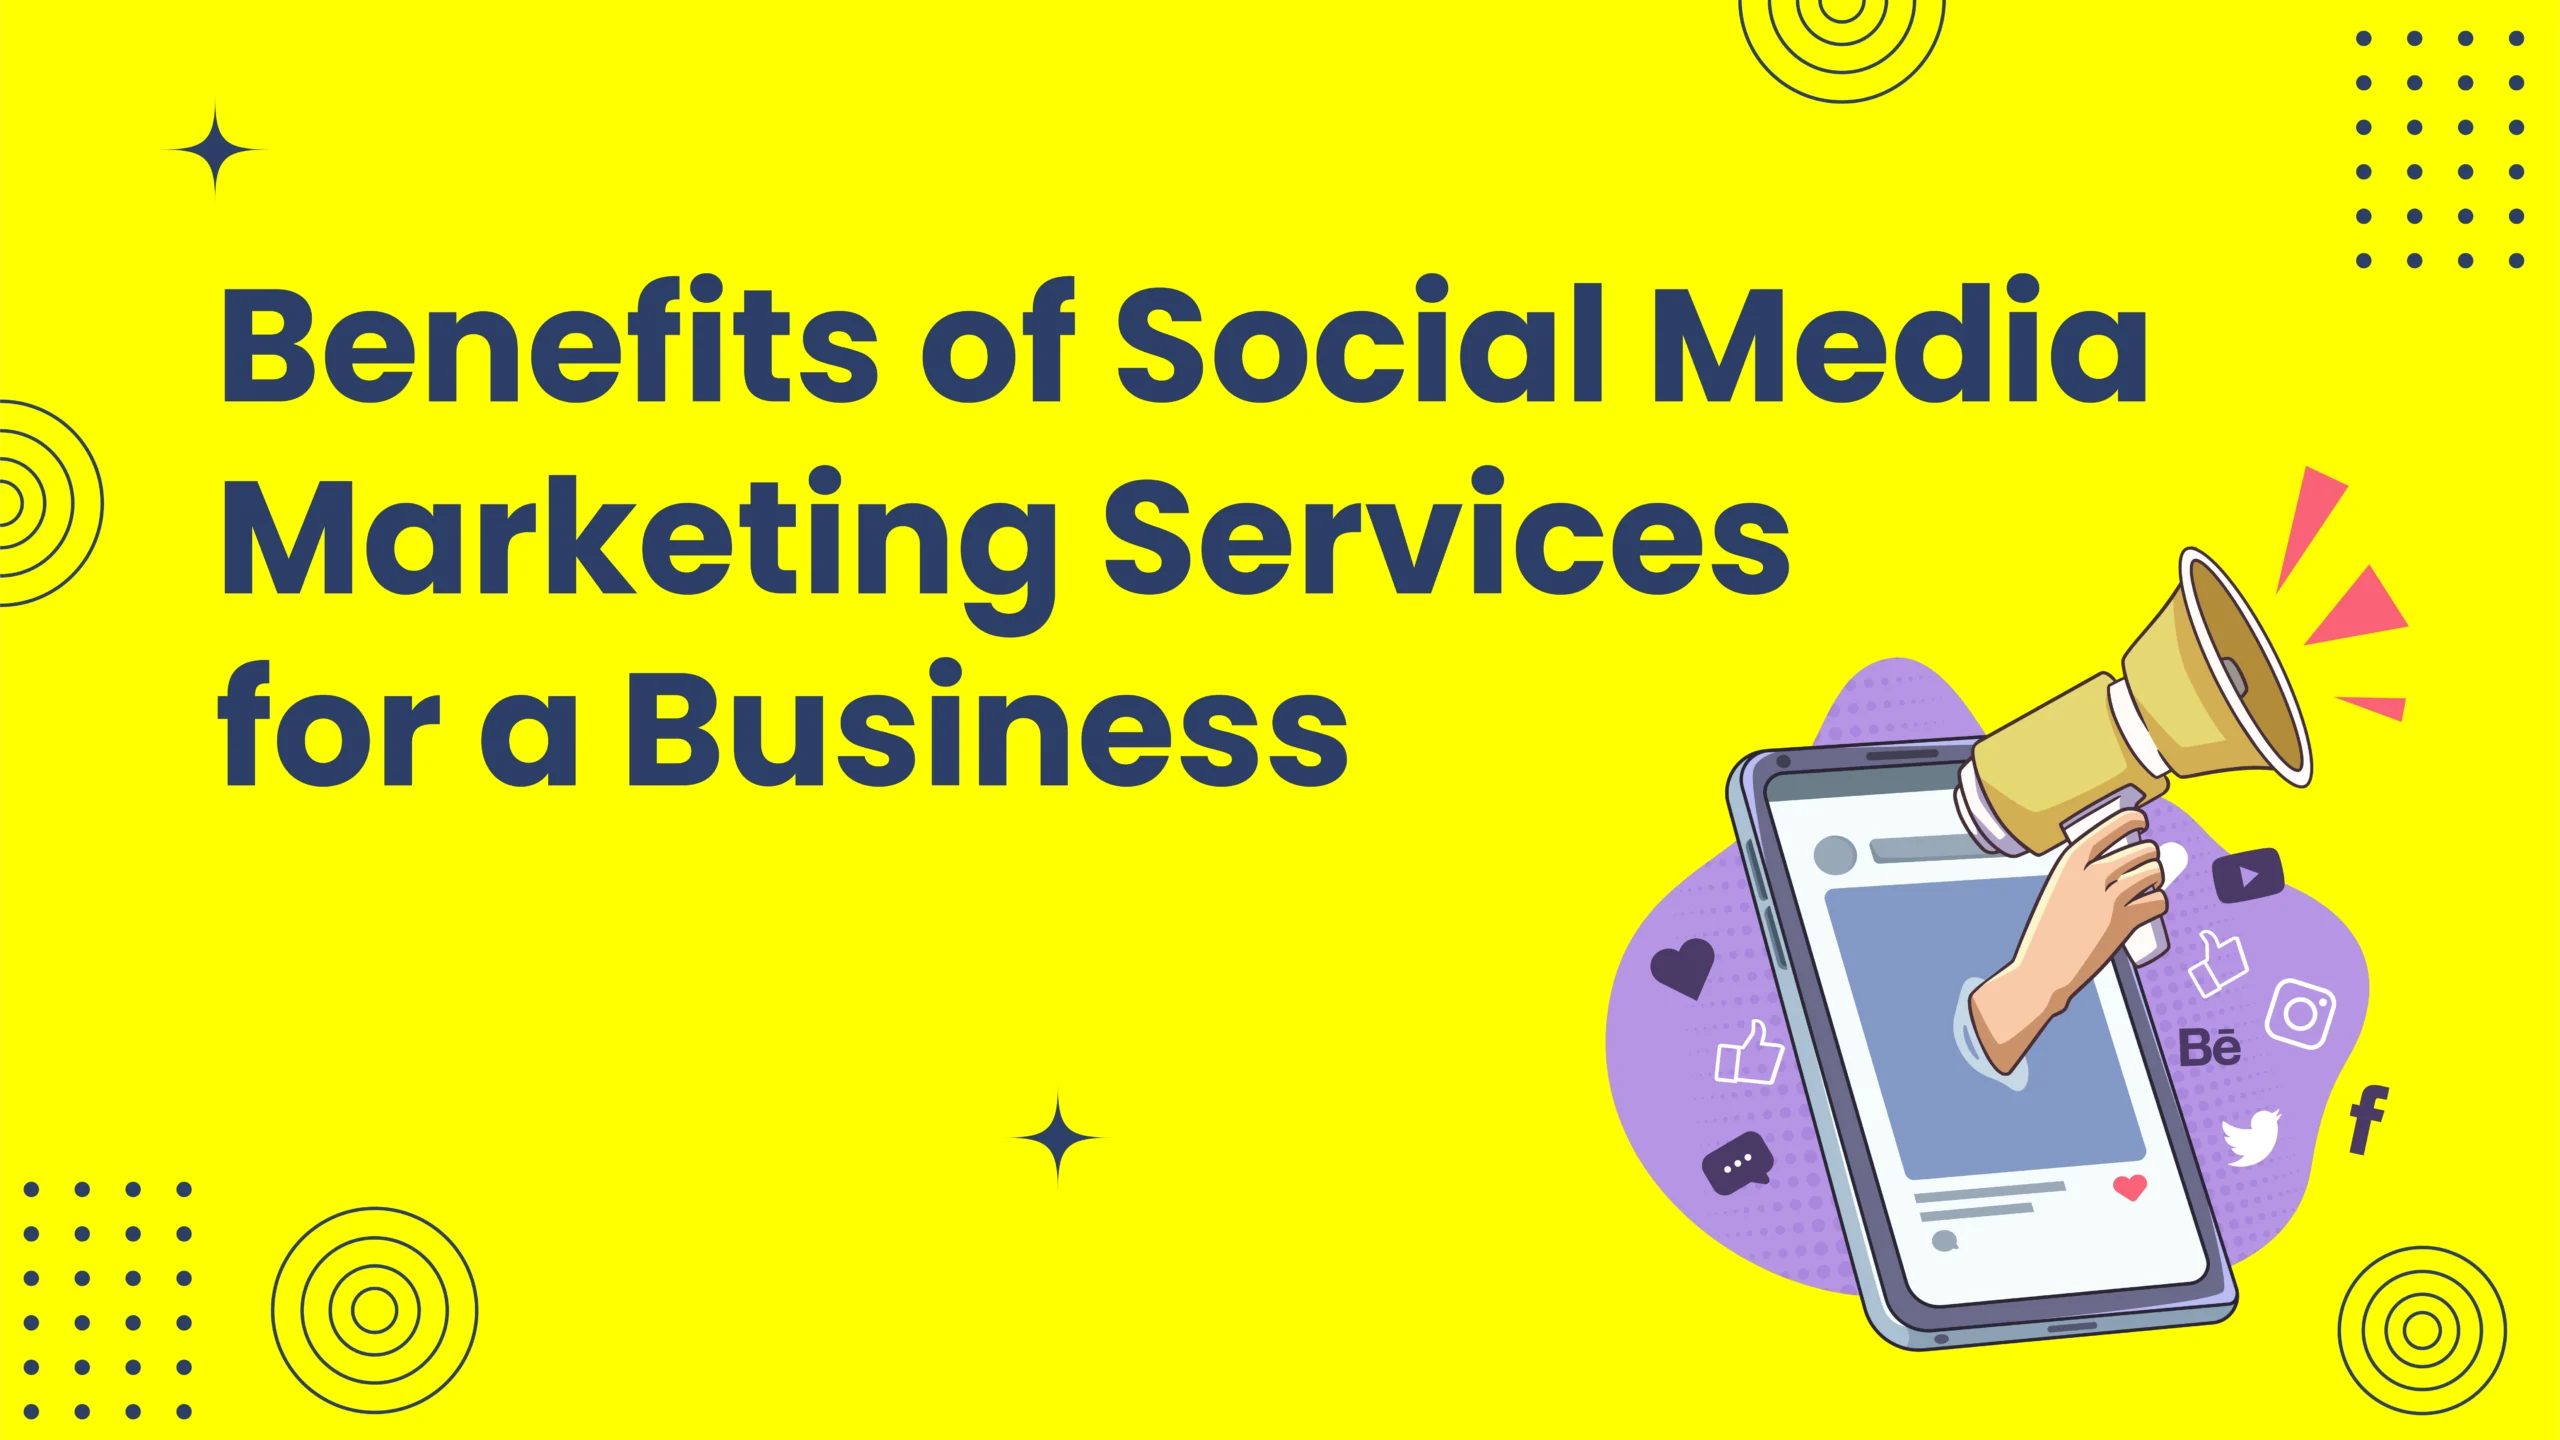 Top Benefits of Social Media Marketing Services for Business